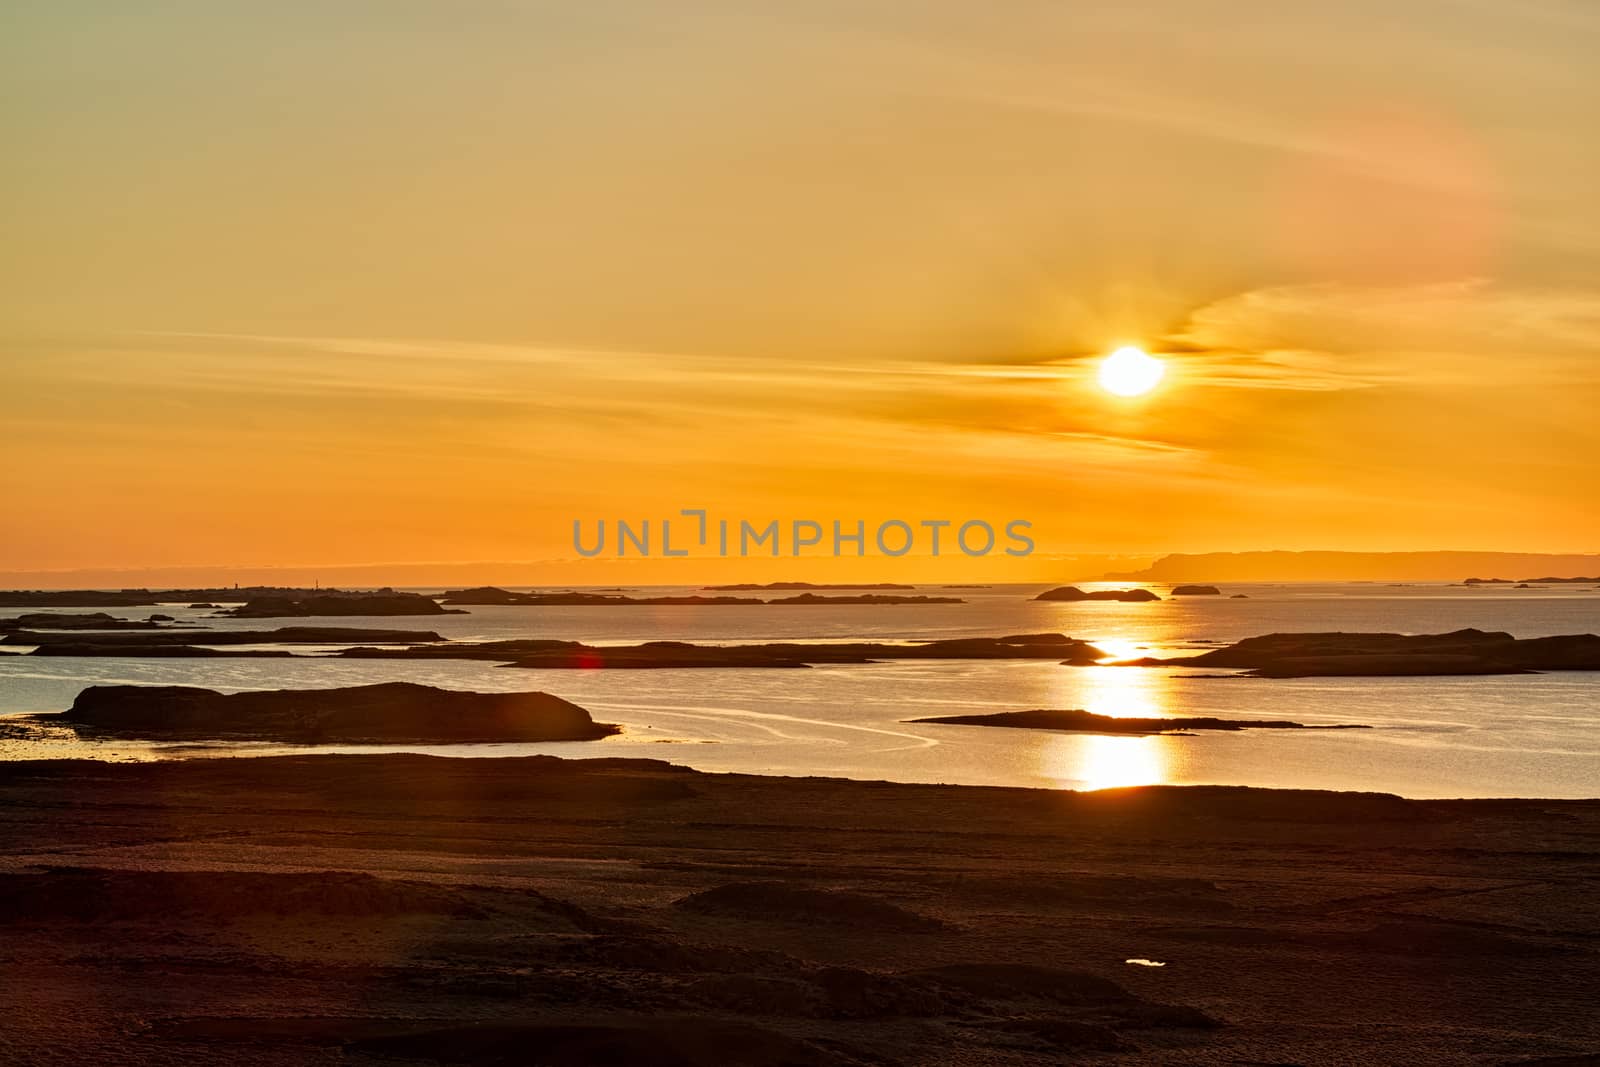 Many islands at sunset near Stykkisholmur in west Iceland